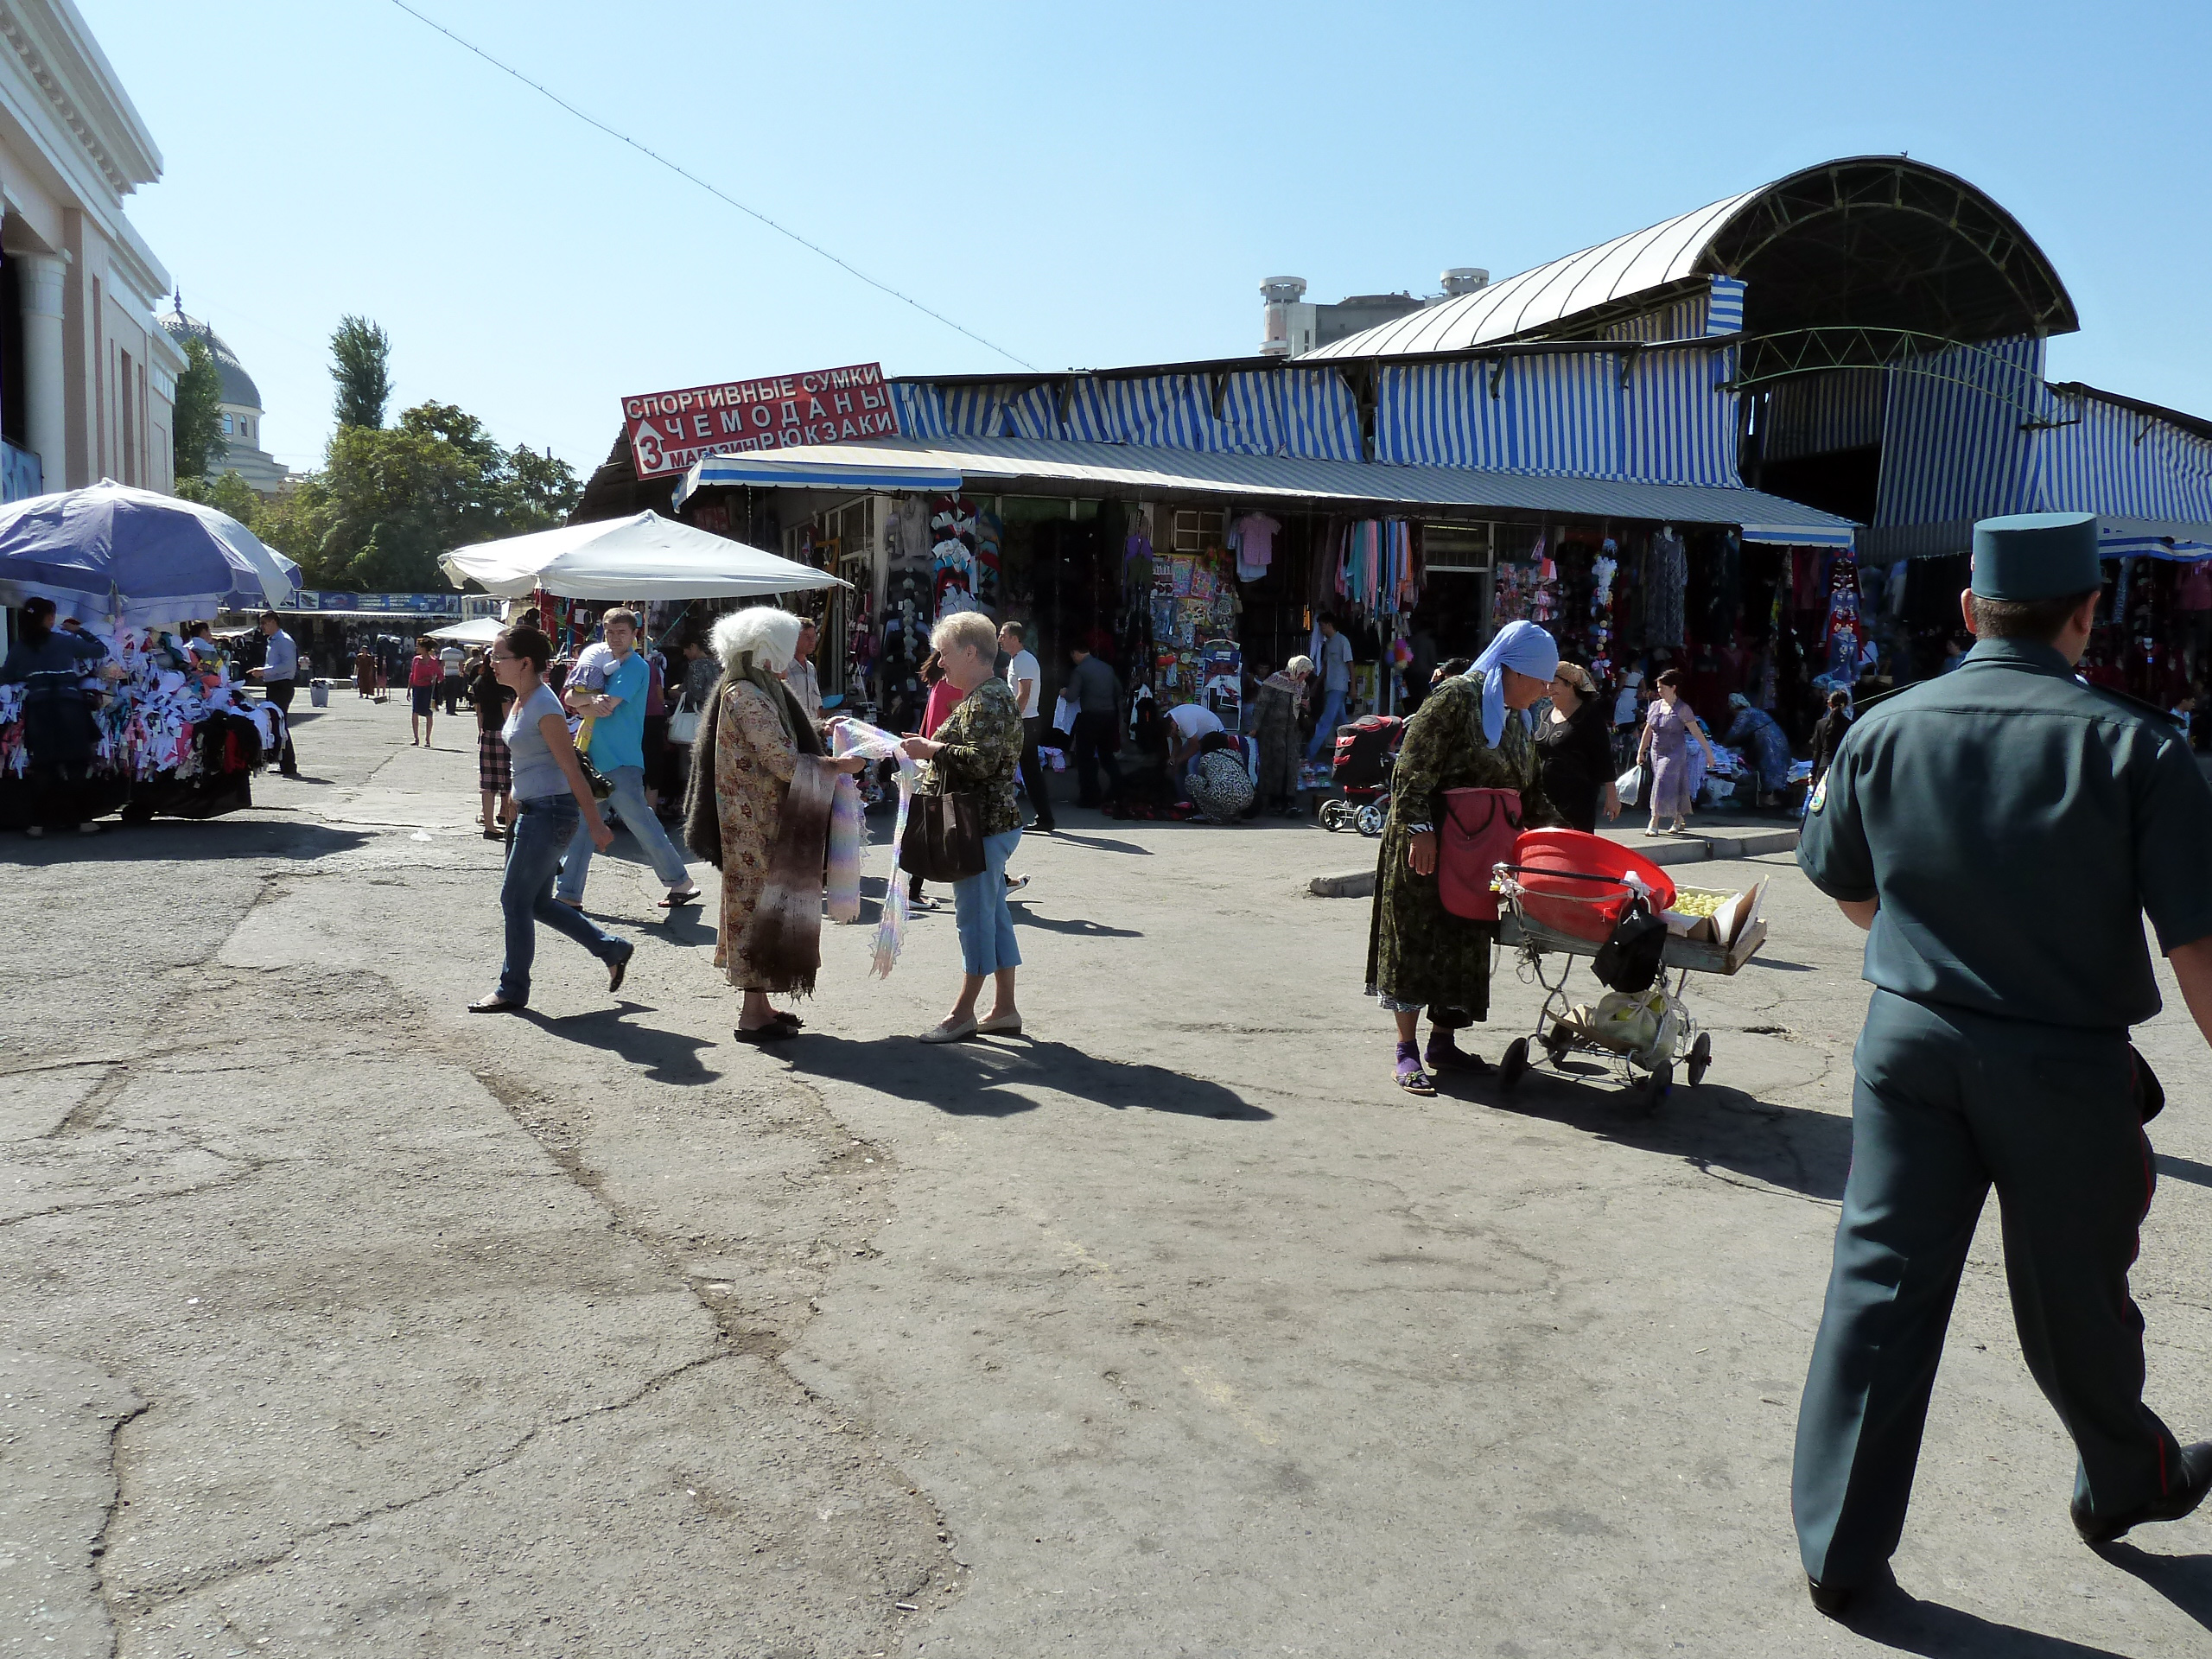 Customers in front of a market hall in Uzbekistan